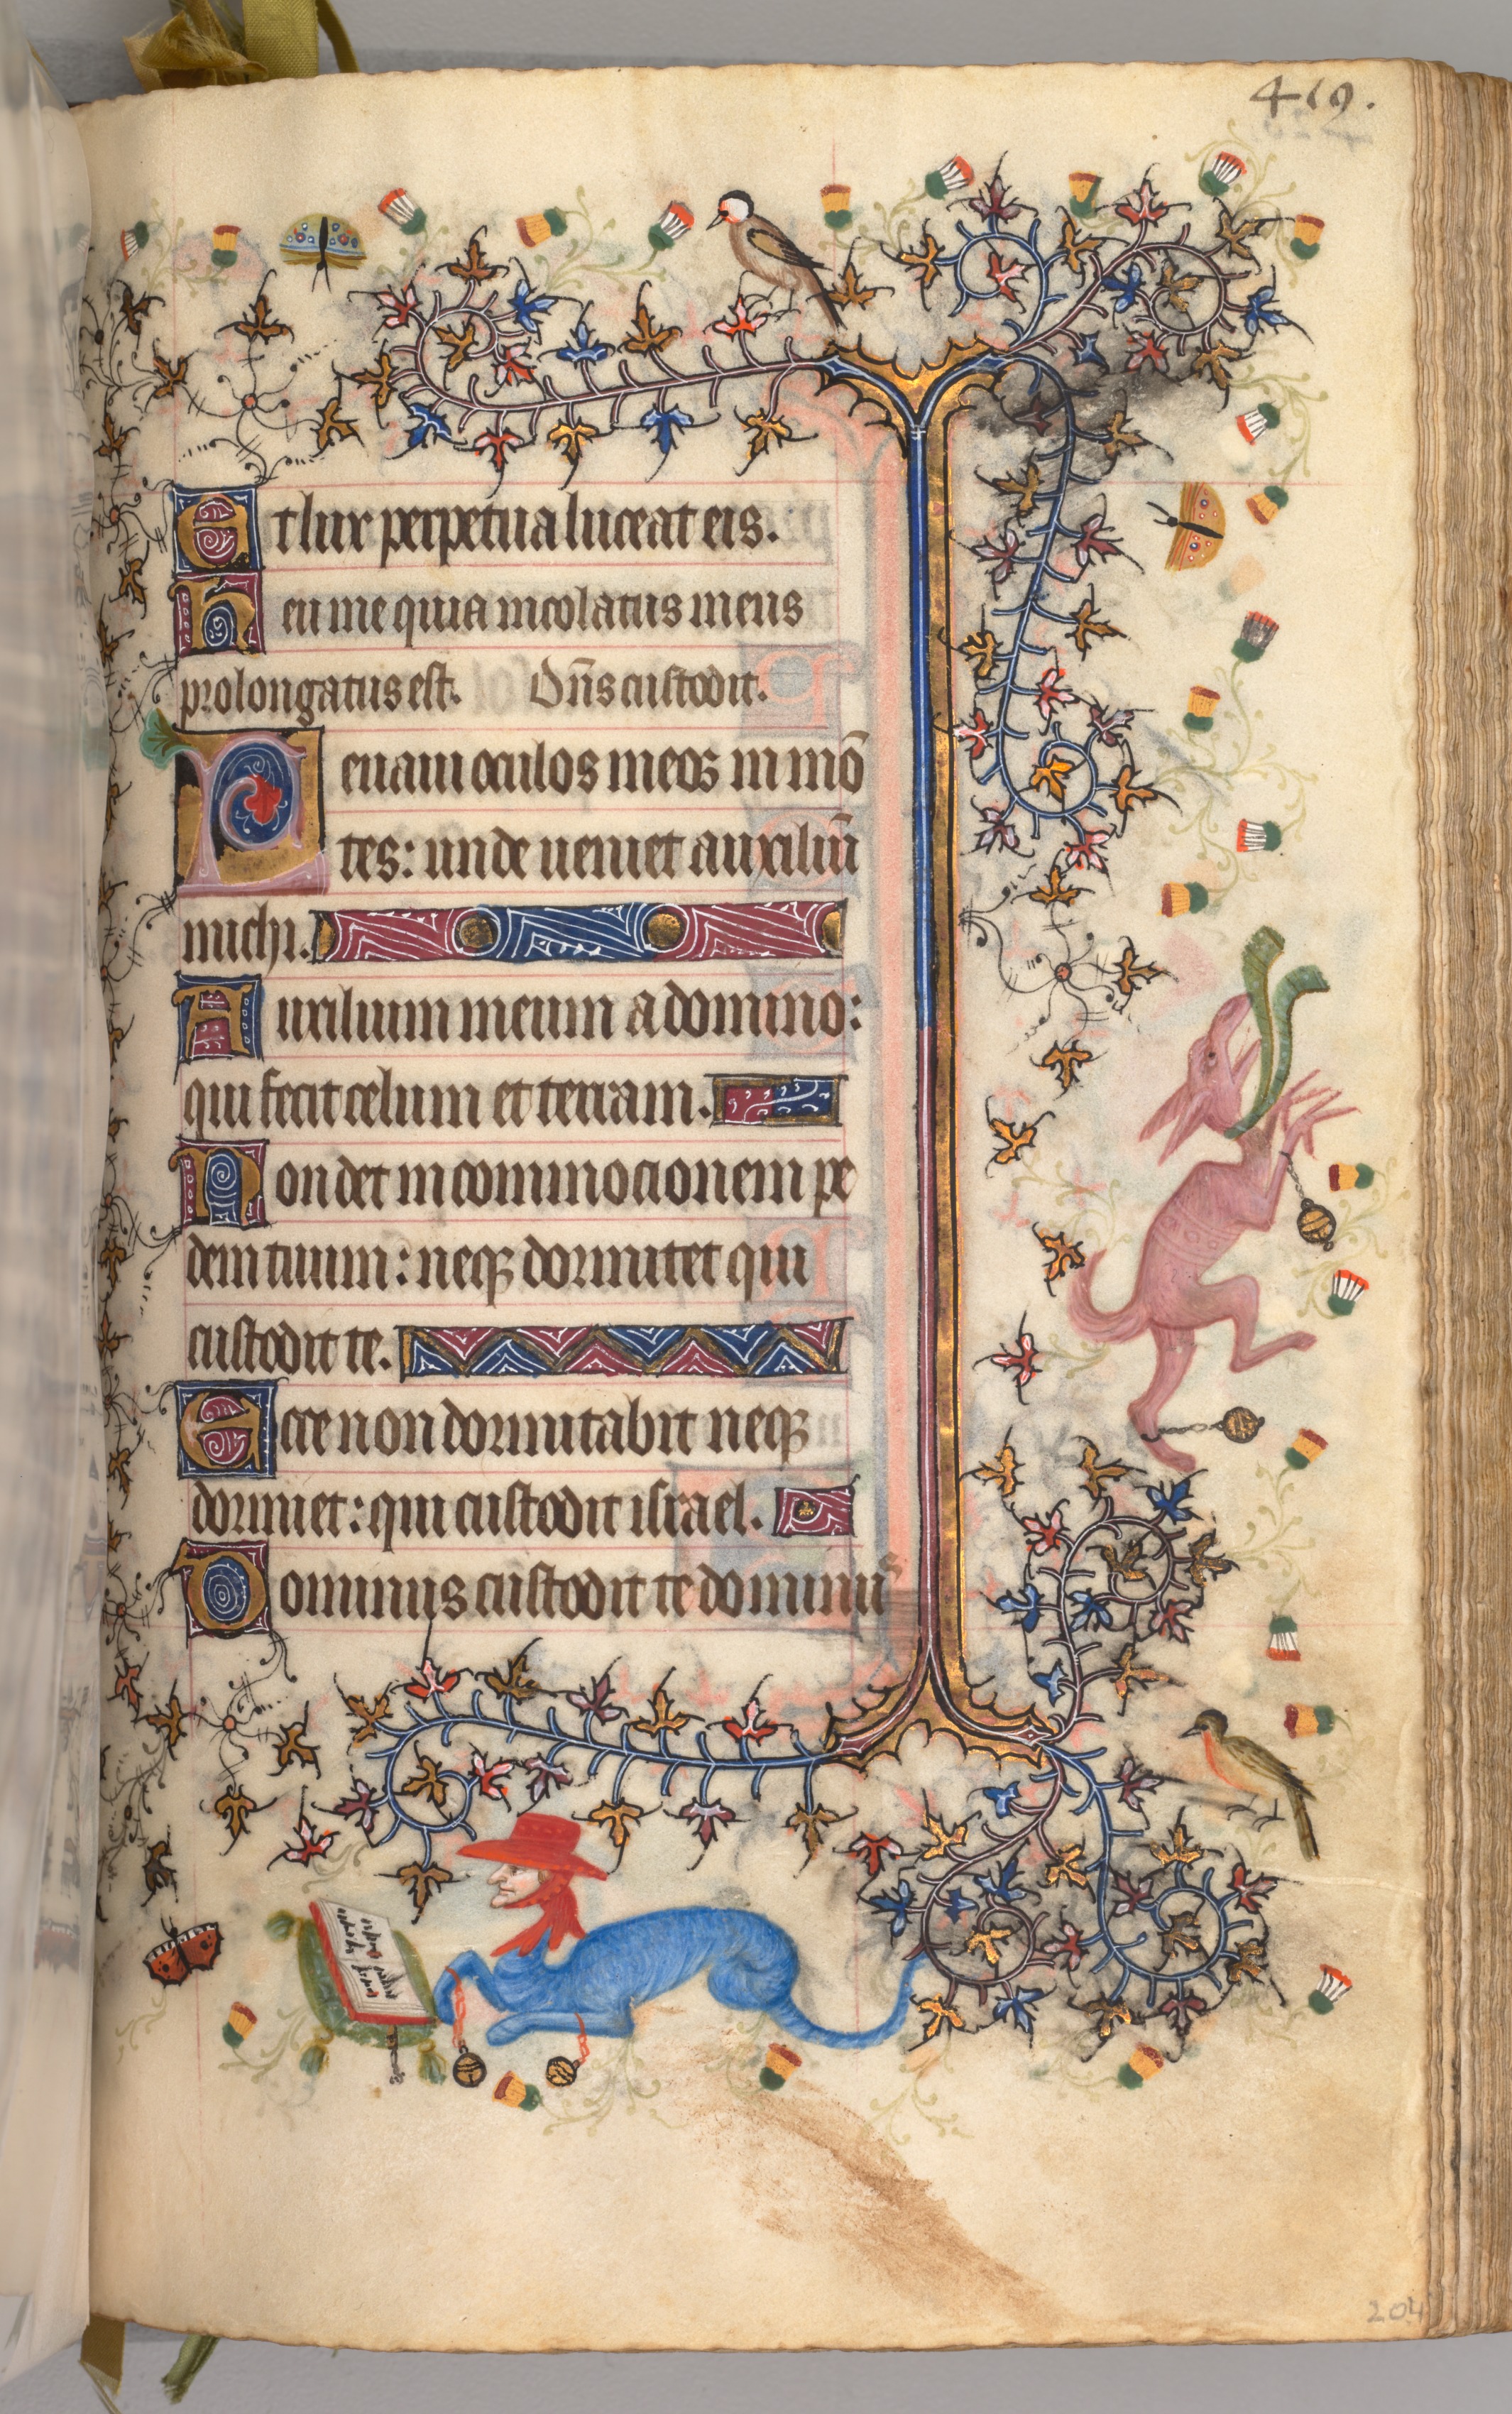 Hours of Charles the Noble, King of Navarre (1361-1425): fol. 204r, Text